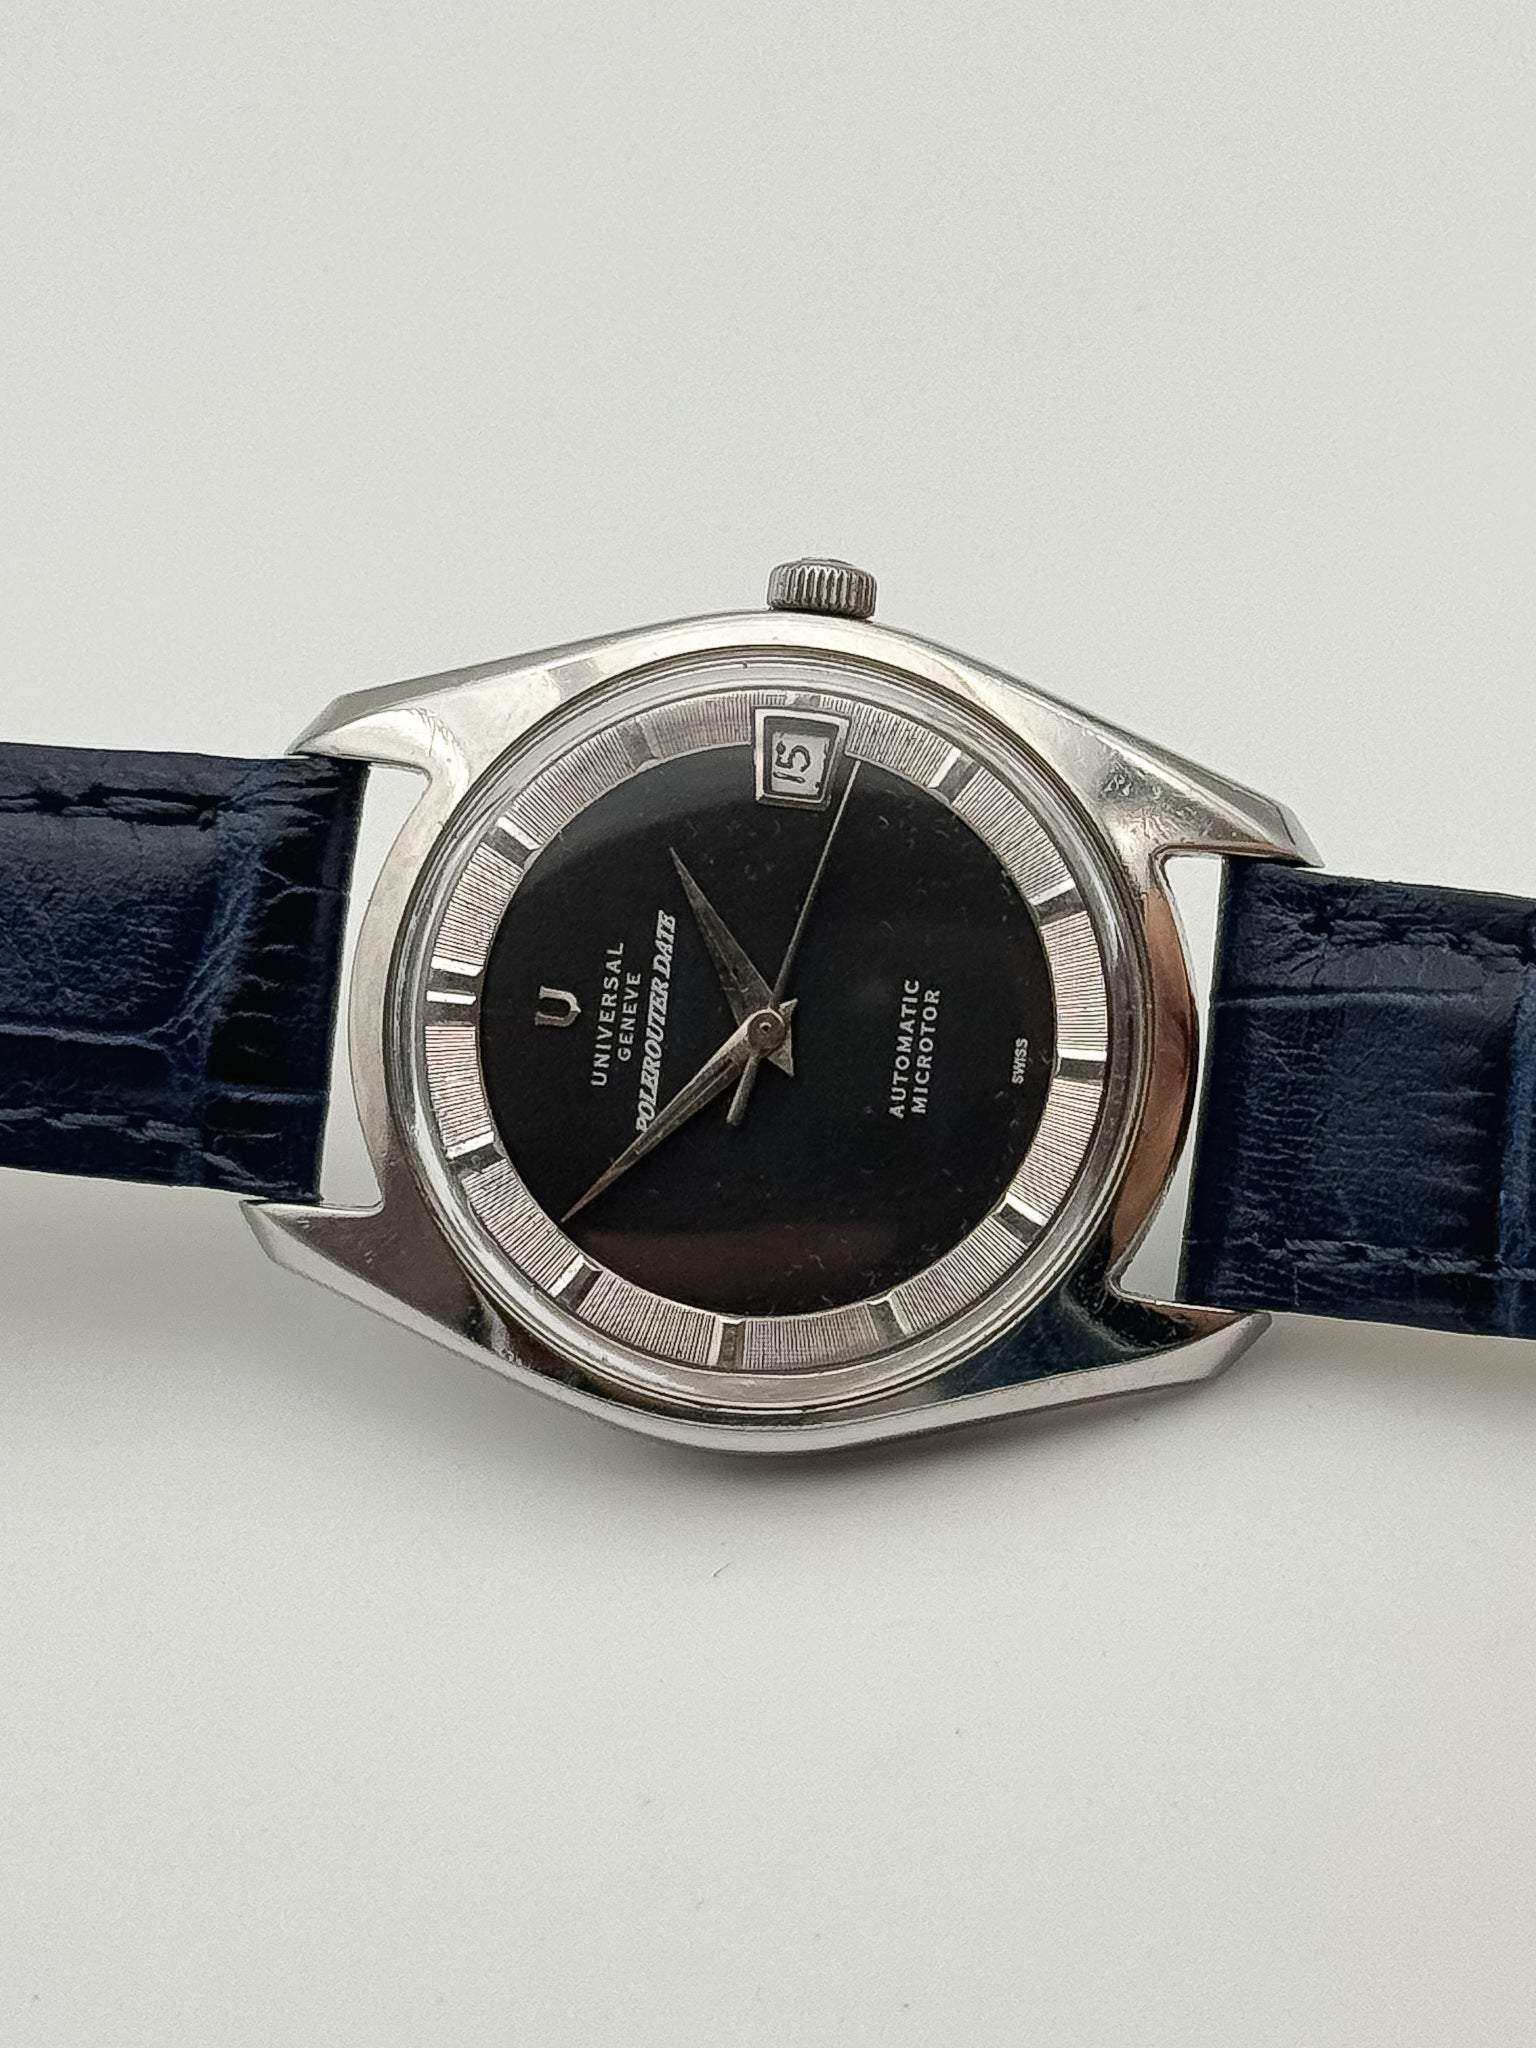 Universal Genève - Polerouter Date Micro Rotor - 1960’s - Atelier Victor